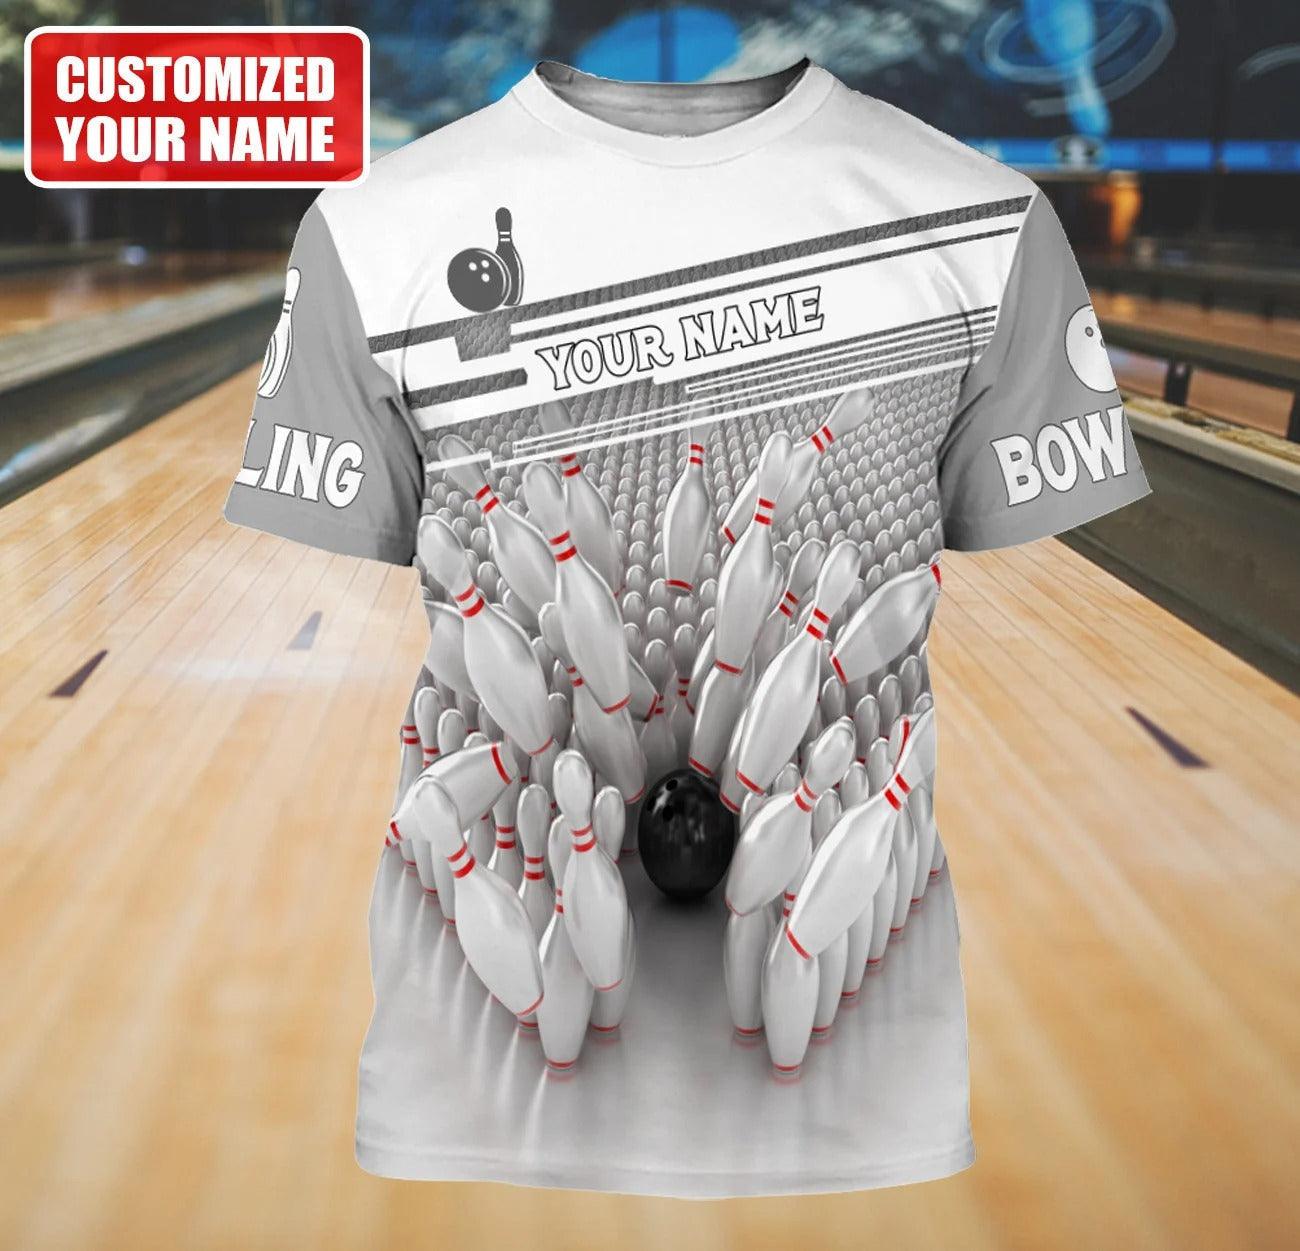 Customized Name Bowling T Shirt, Personalized Name Grey Bowling Shirt For Men And Women - Perfect Gift For Bowling Lovers, Bowlers - Amzanimalsgift